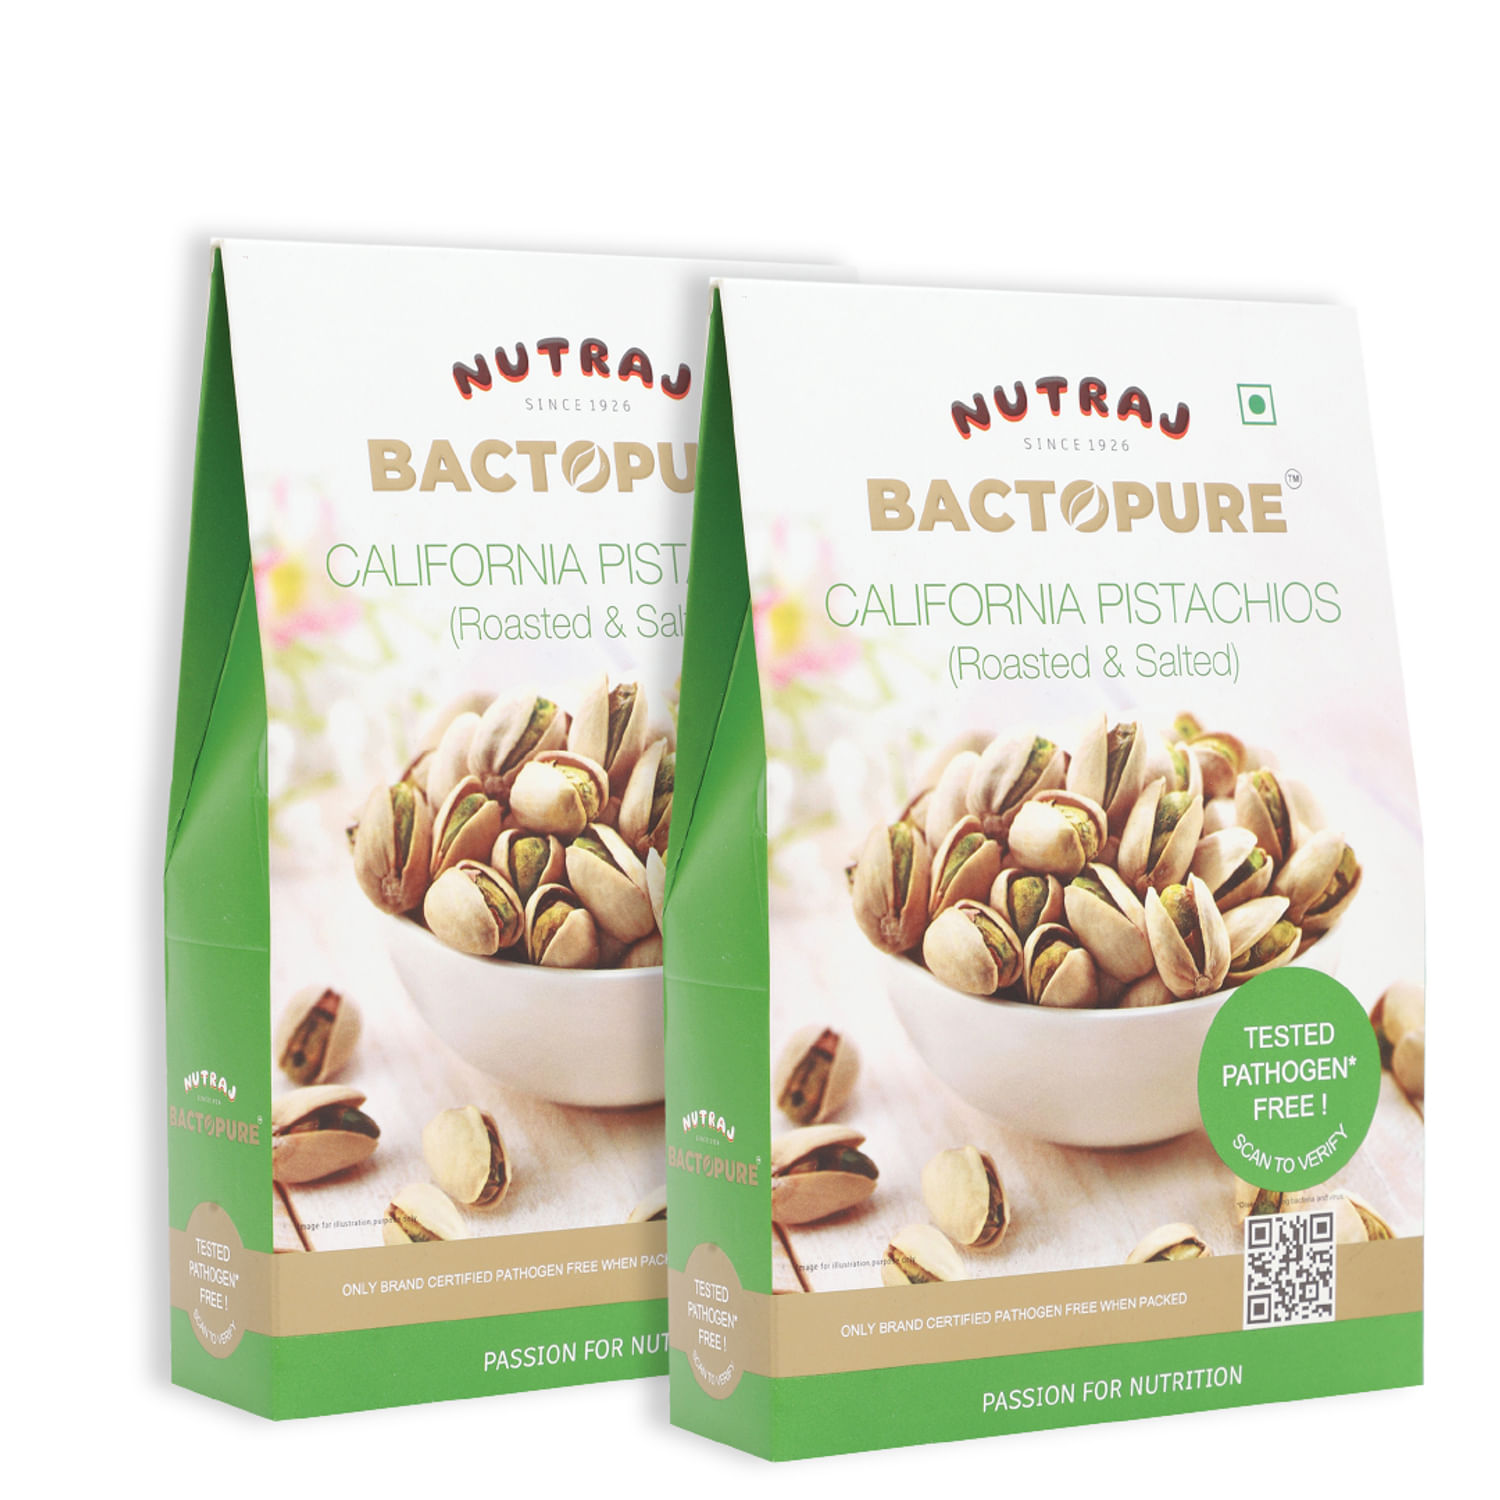 Bactopure California Pista Inshell Roasted and Salted 250 gm - Pack of 2